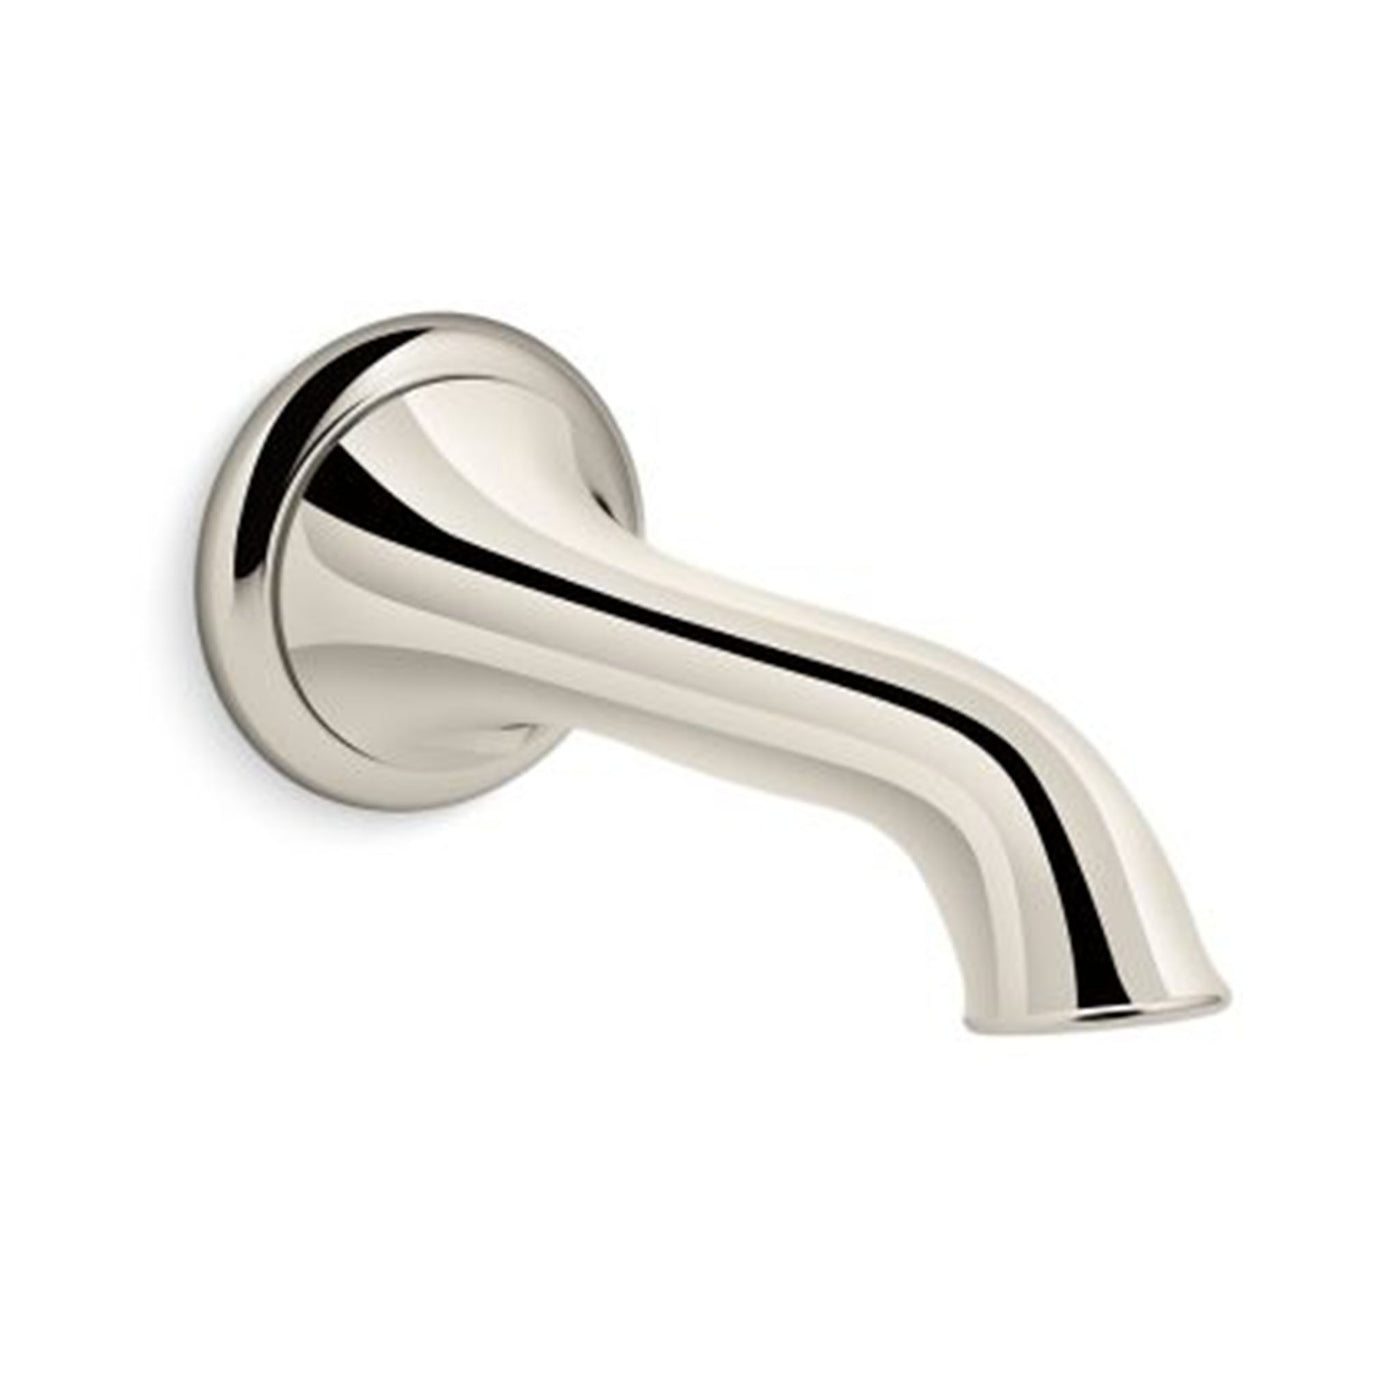 Artifacts® Wall-mount bath spout with flare design